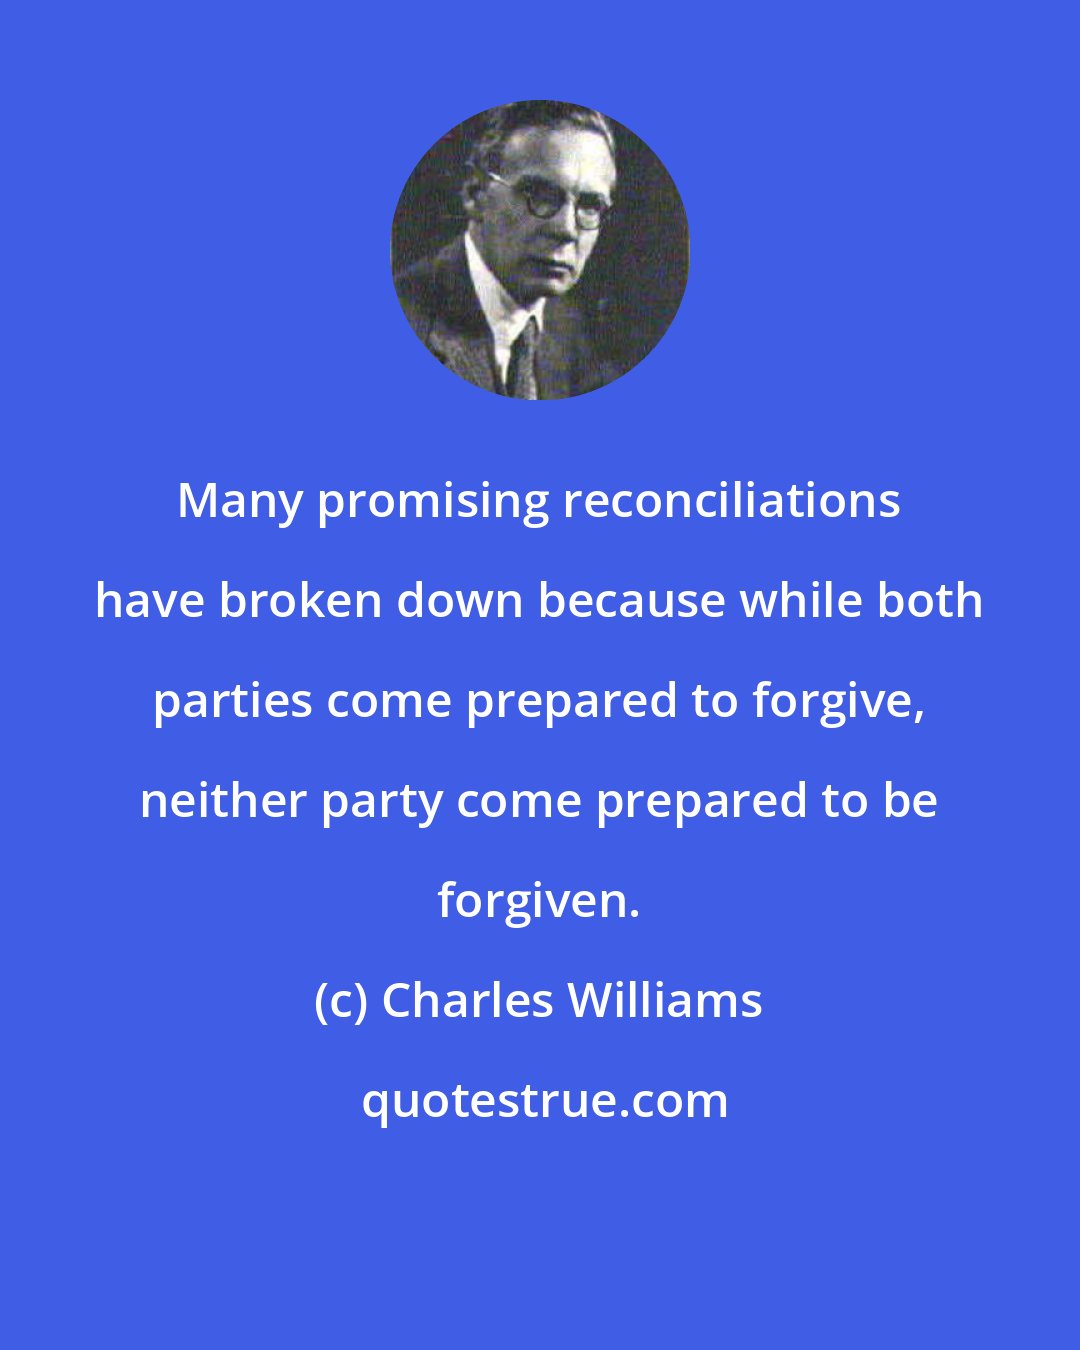 Charles Williams: Many promising reconciliations have broken down because while both parties come prepared to forgive, neither party come prepared to be forgiven.